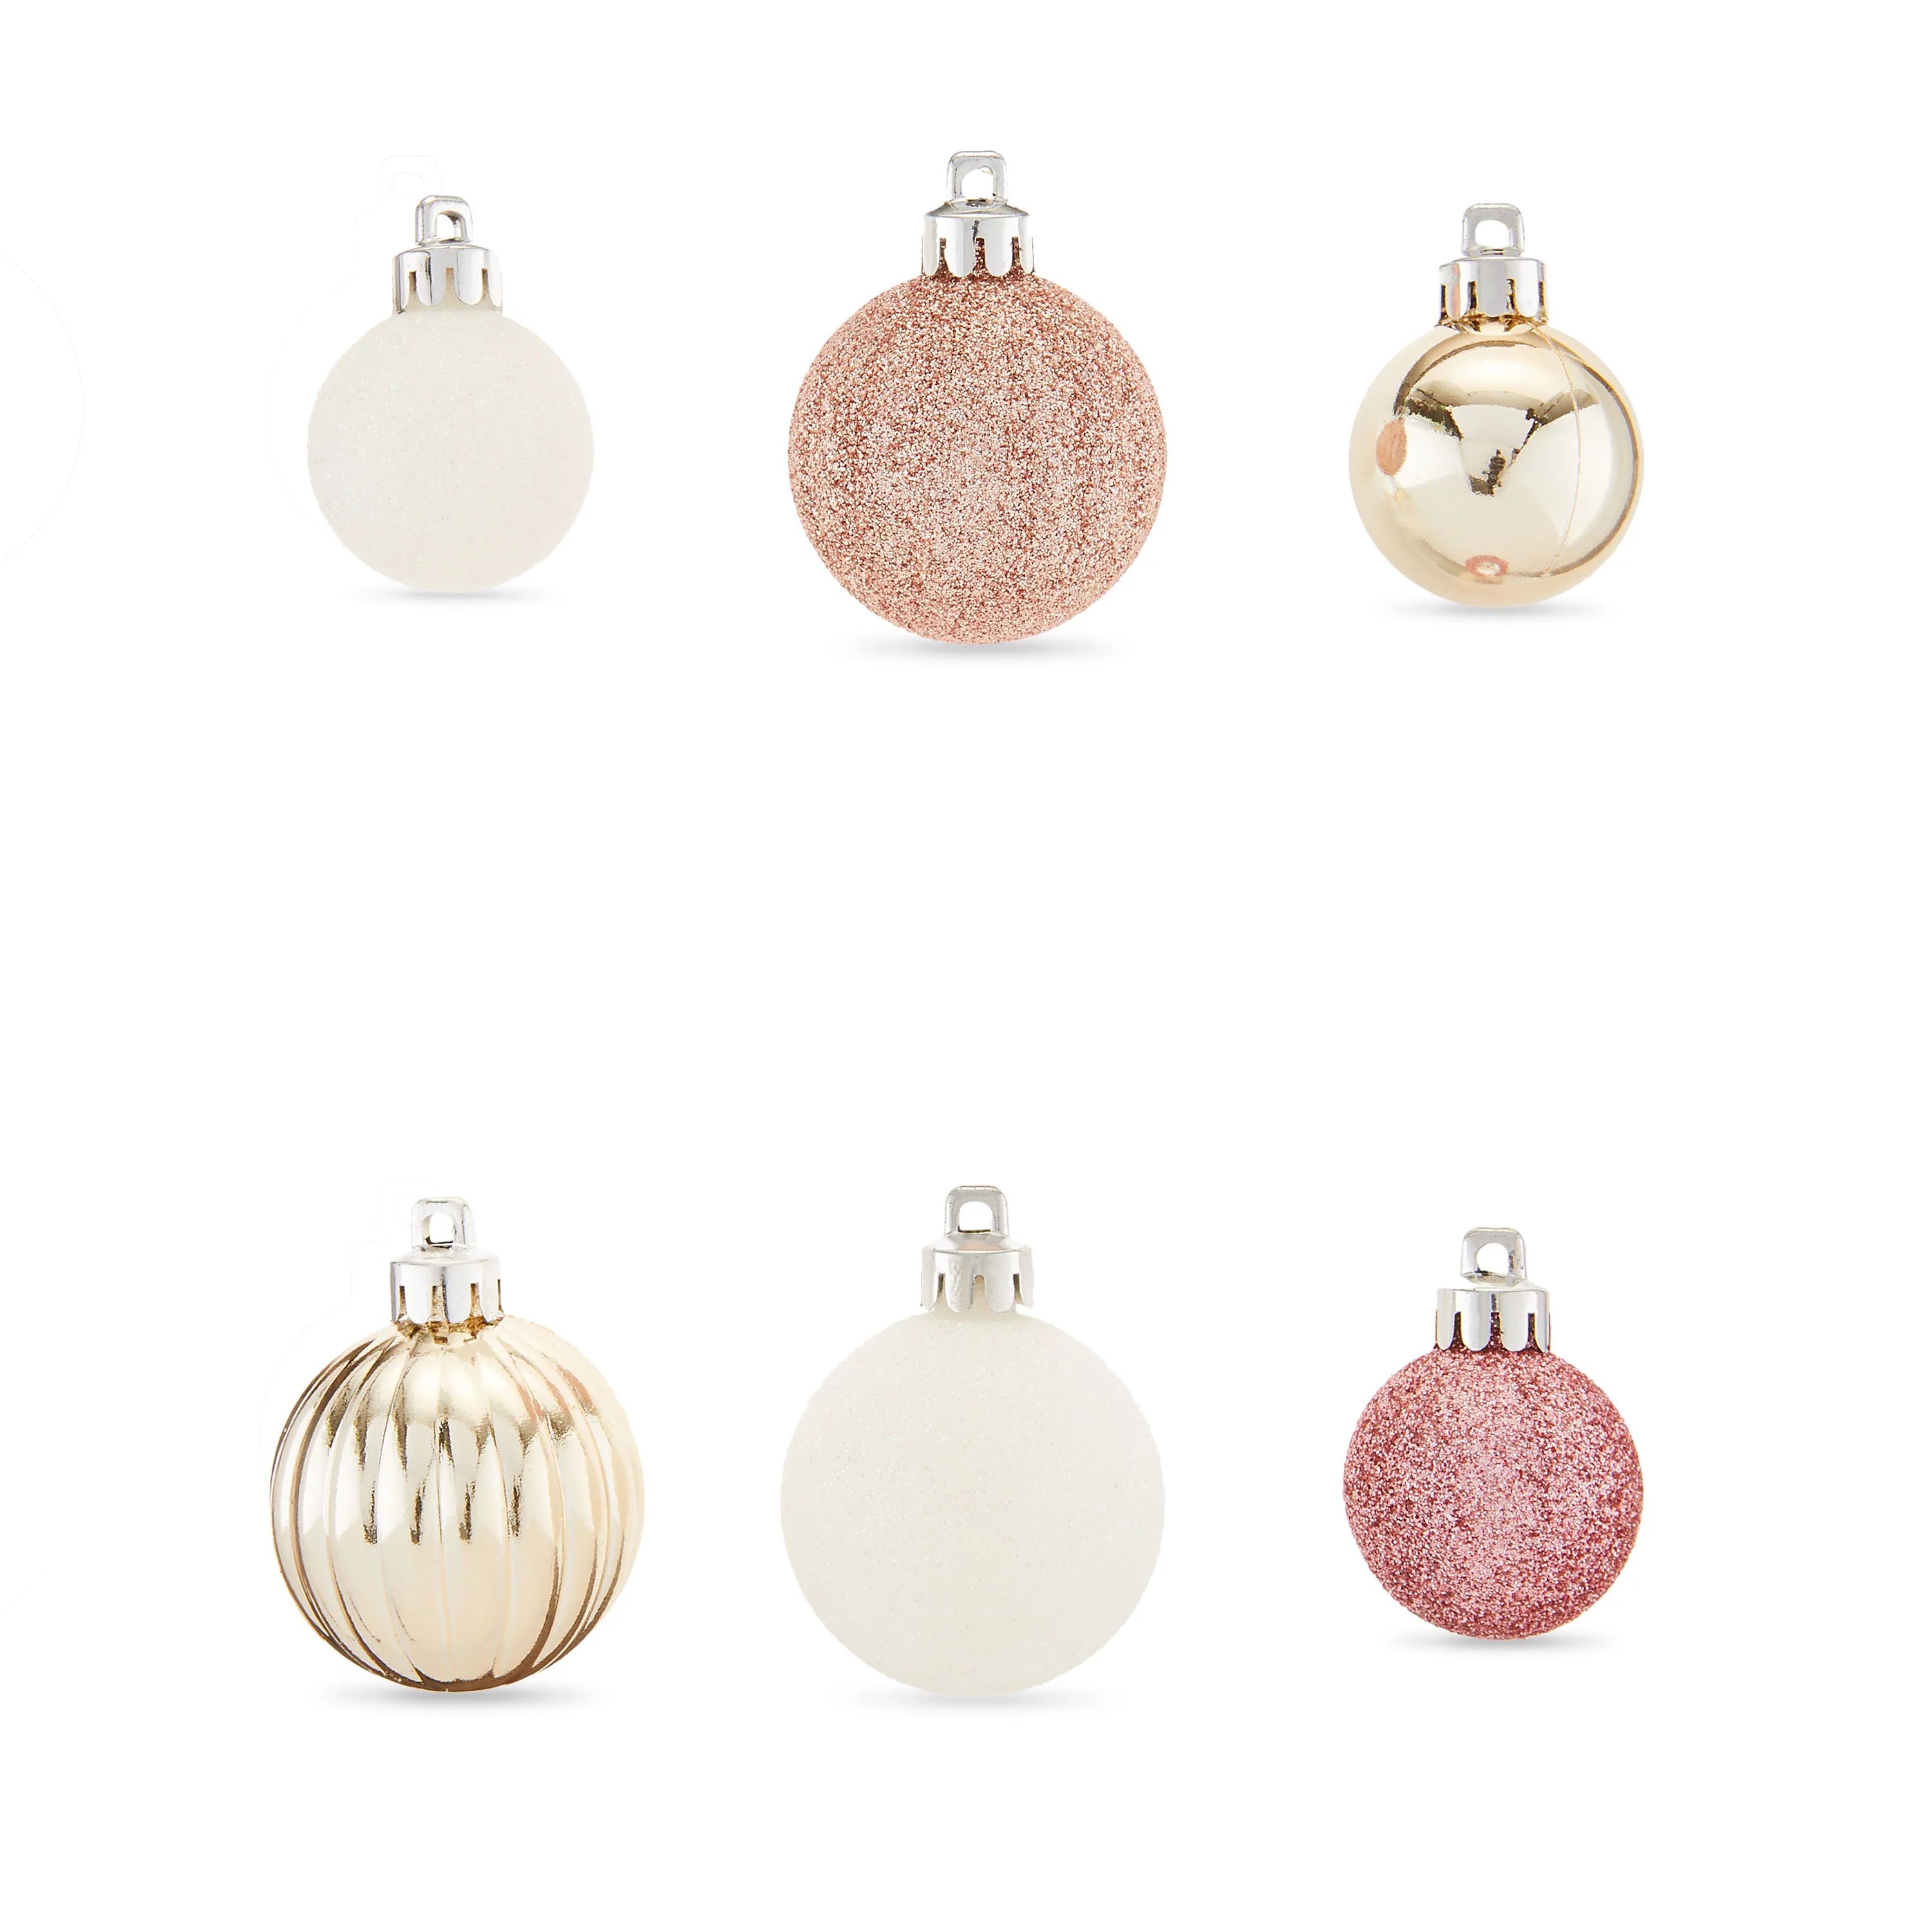 Mini Champagne, Blush & White Shatterproof Christmas Ornaments, 20 Count, by Holiday Time | Walmart (US)